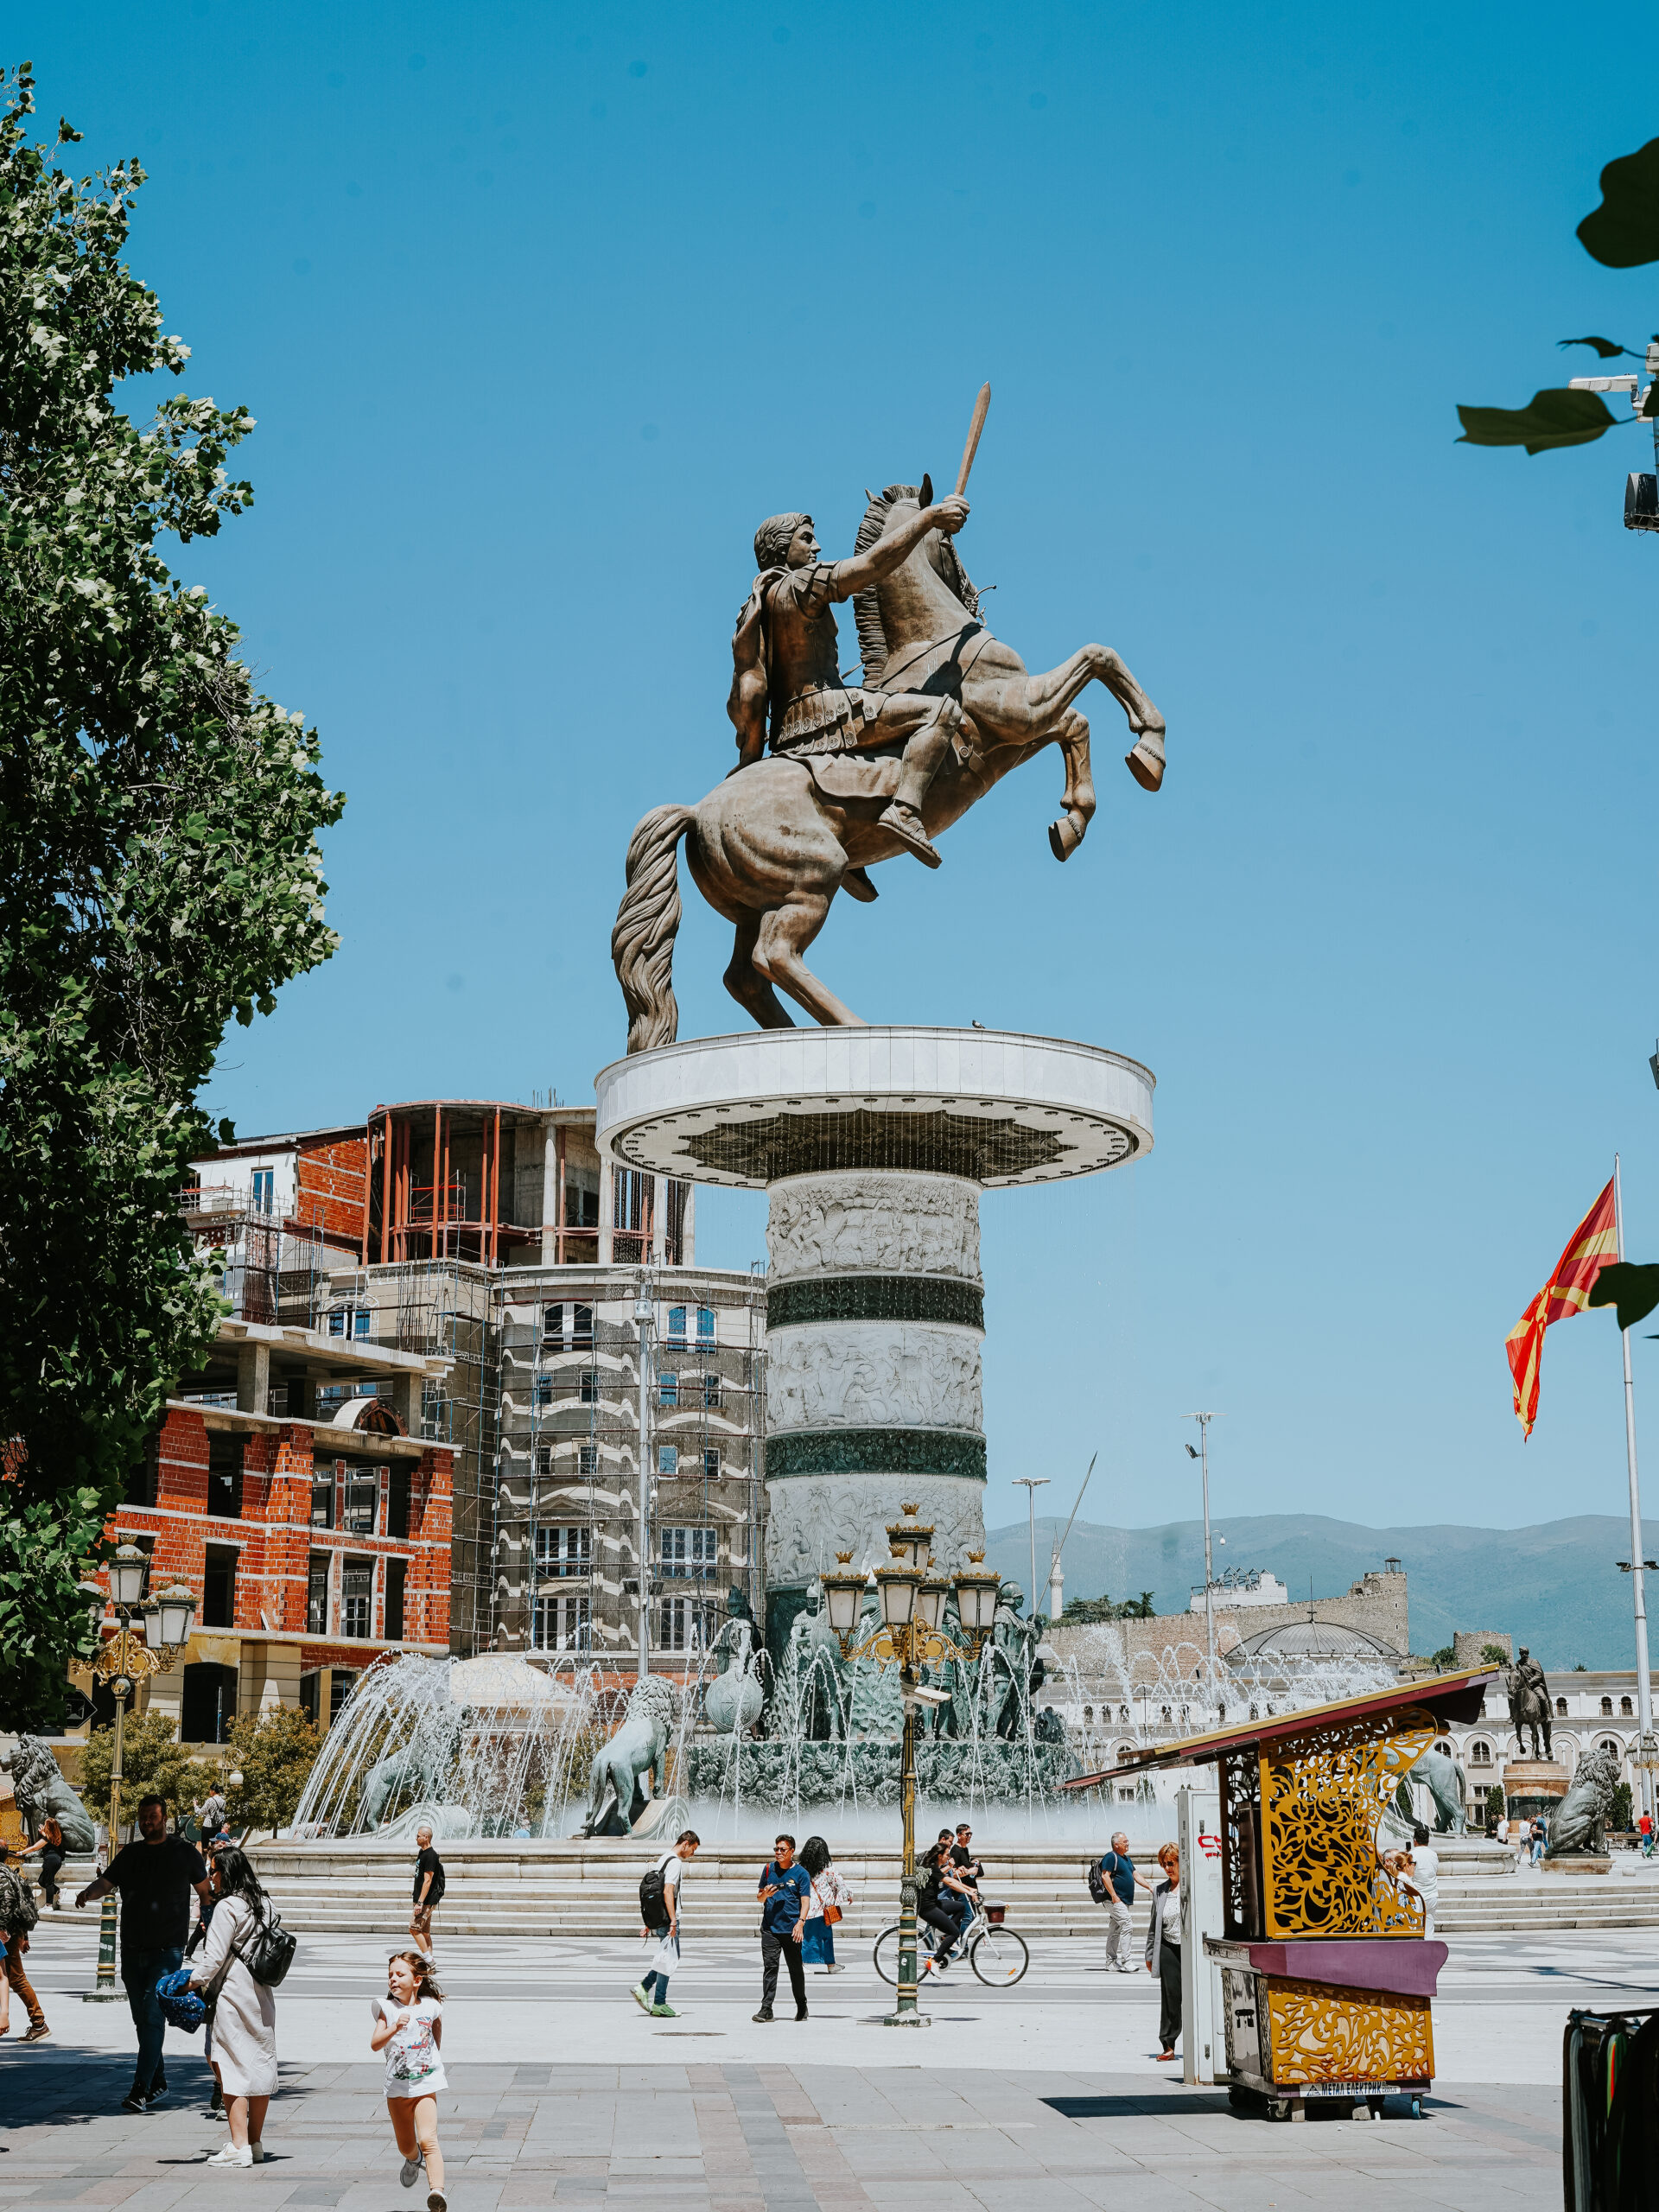 Warrior on a Horse in Macedonia Square